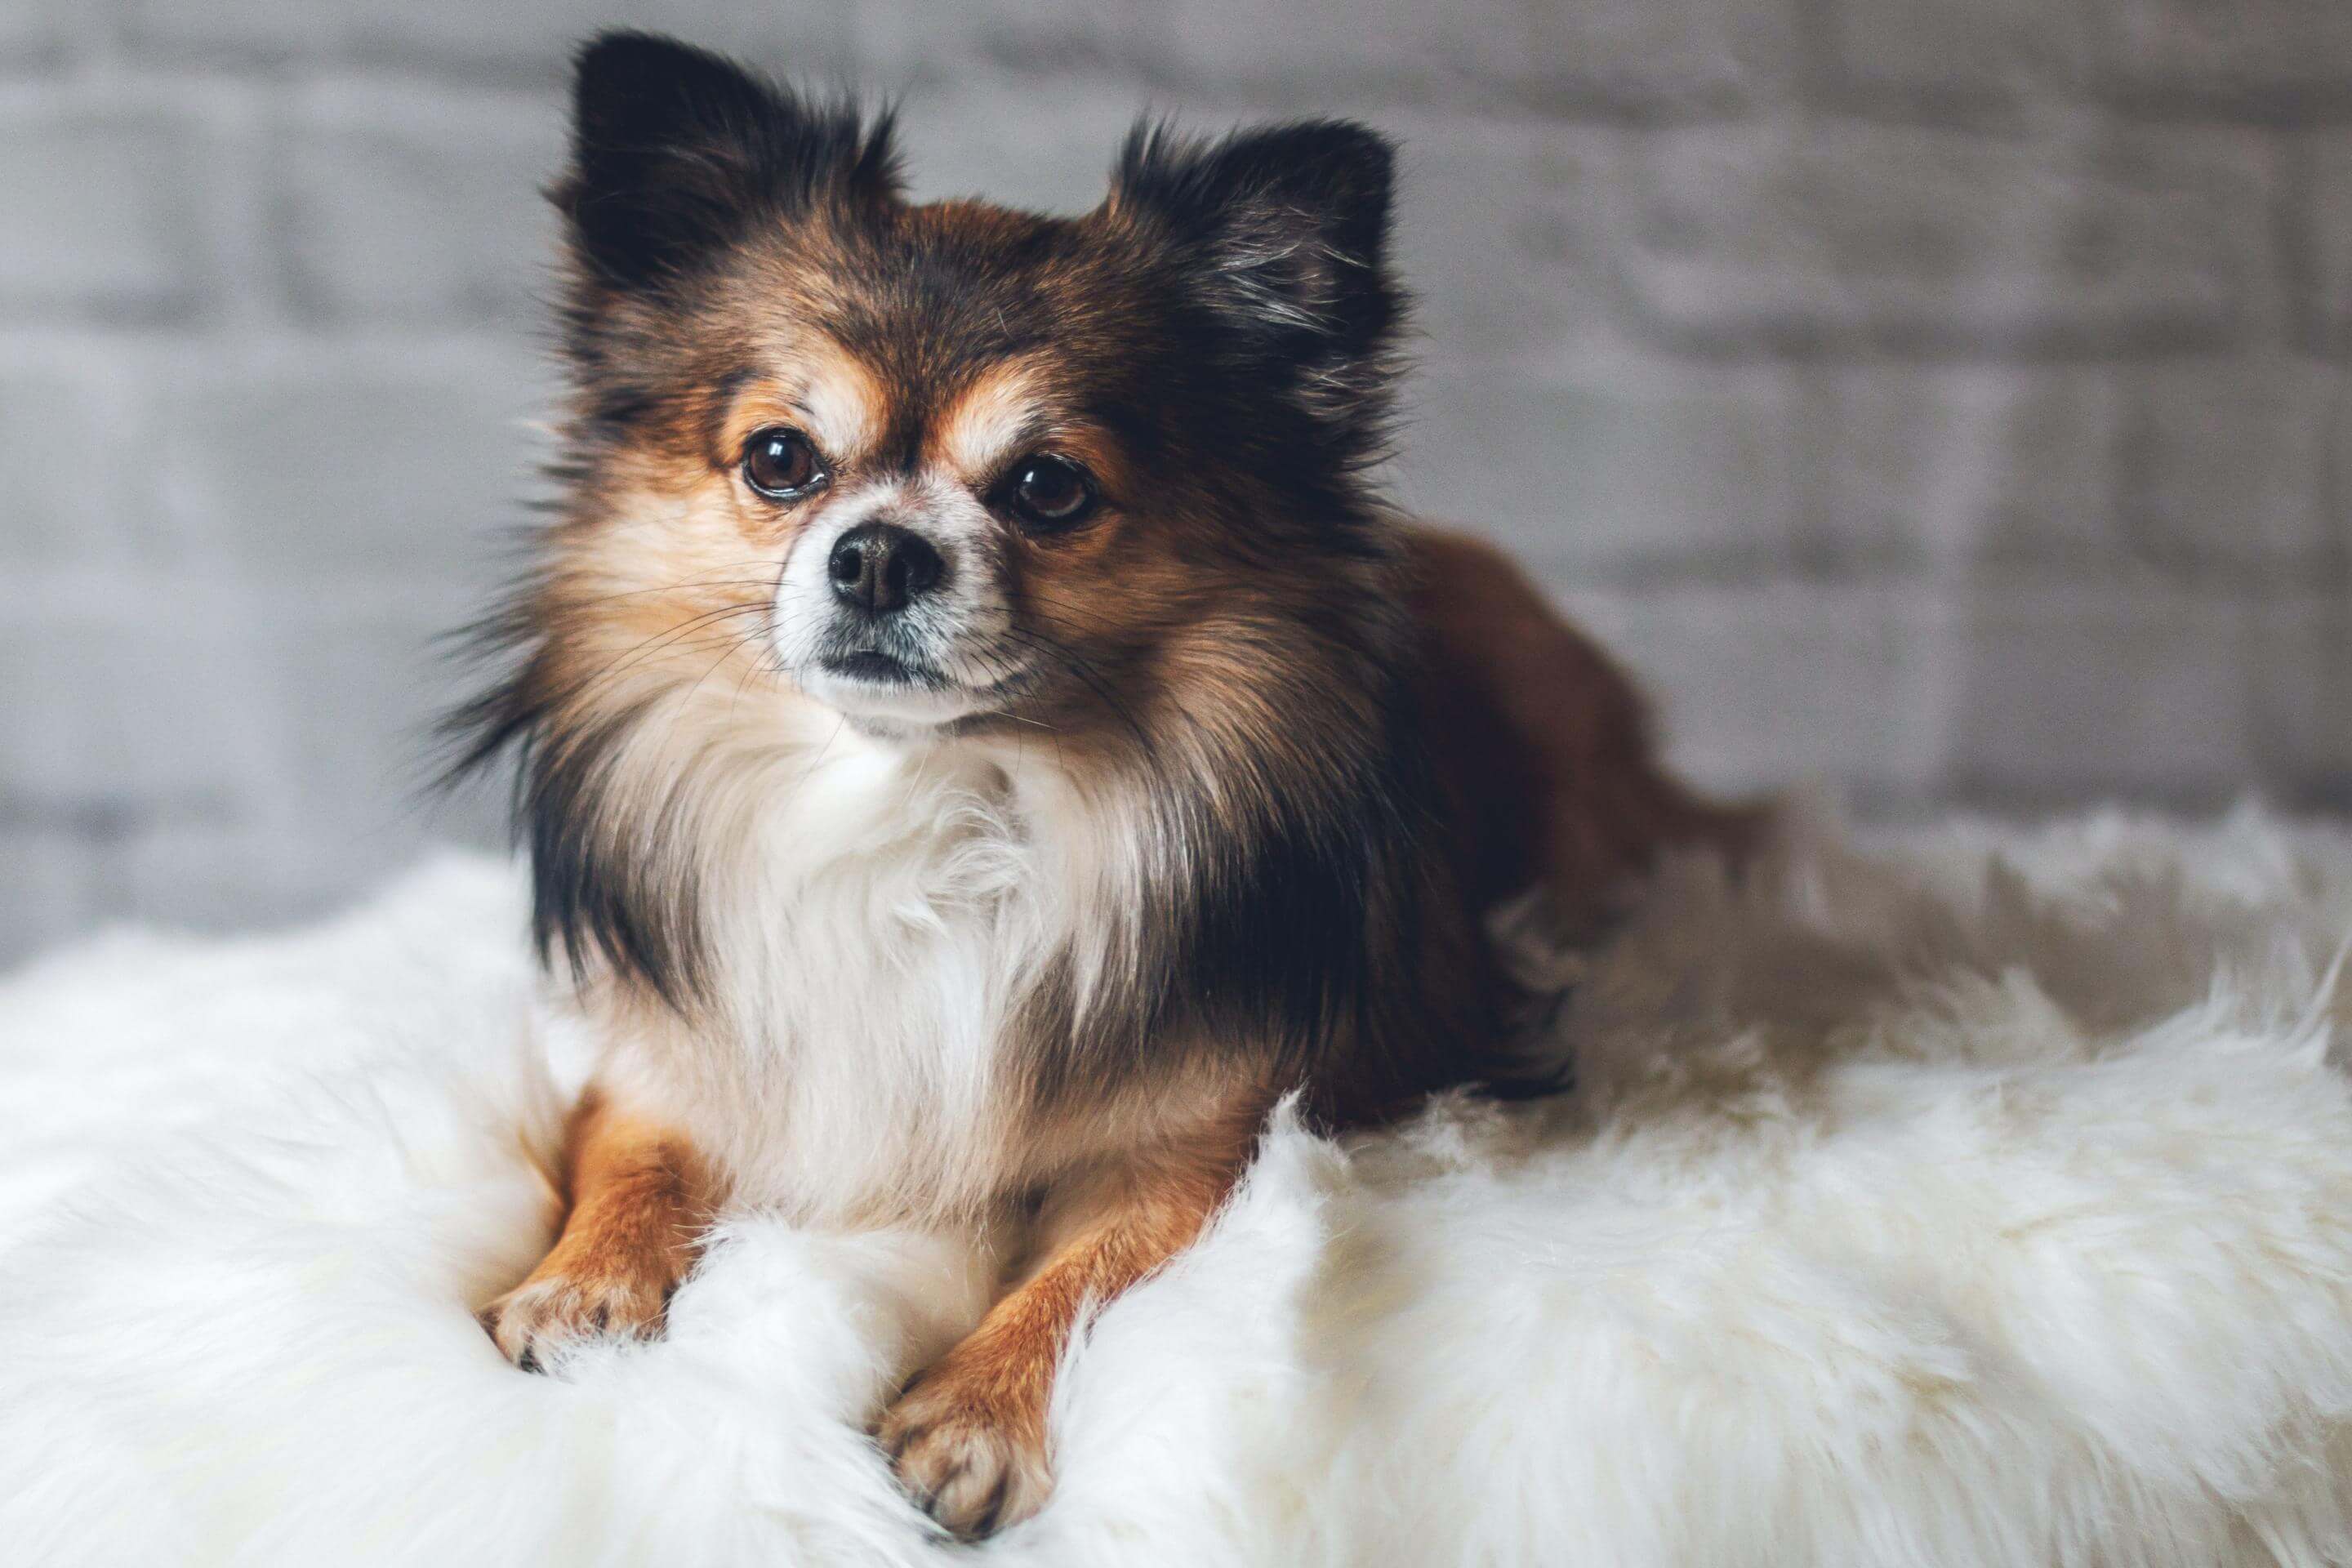 Small tri-color long-haired dog sitting on a fluffy white cushion with a grey backdrop.